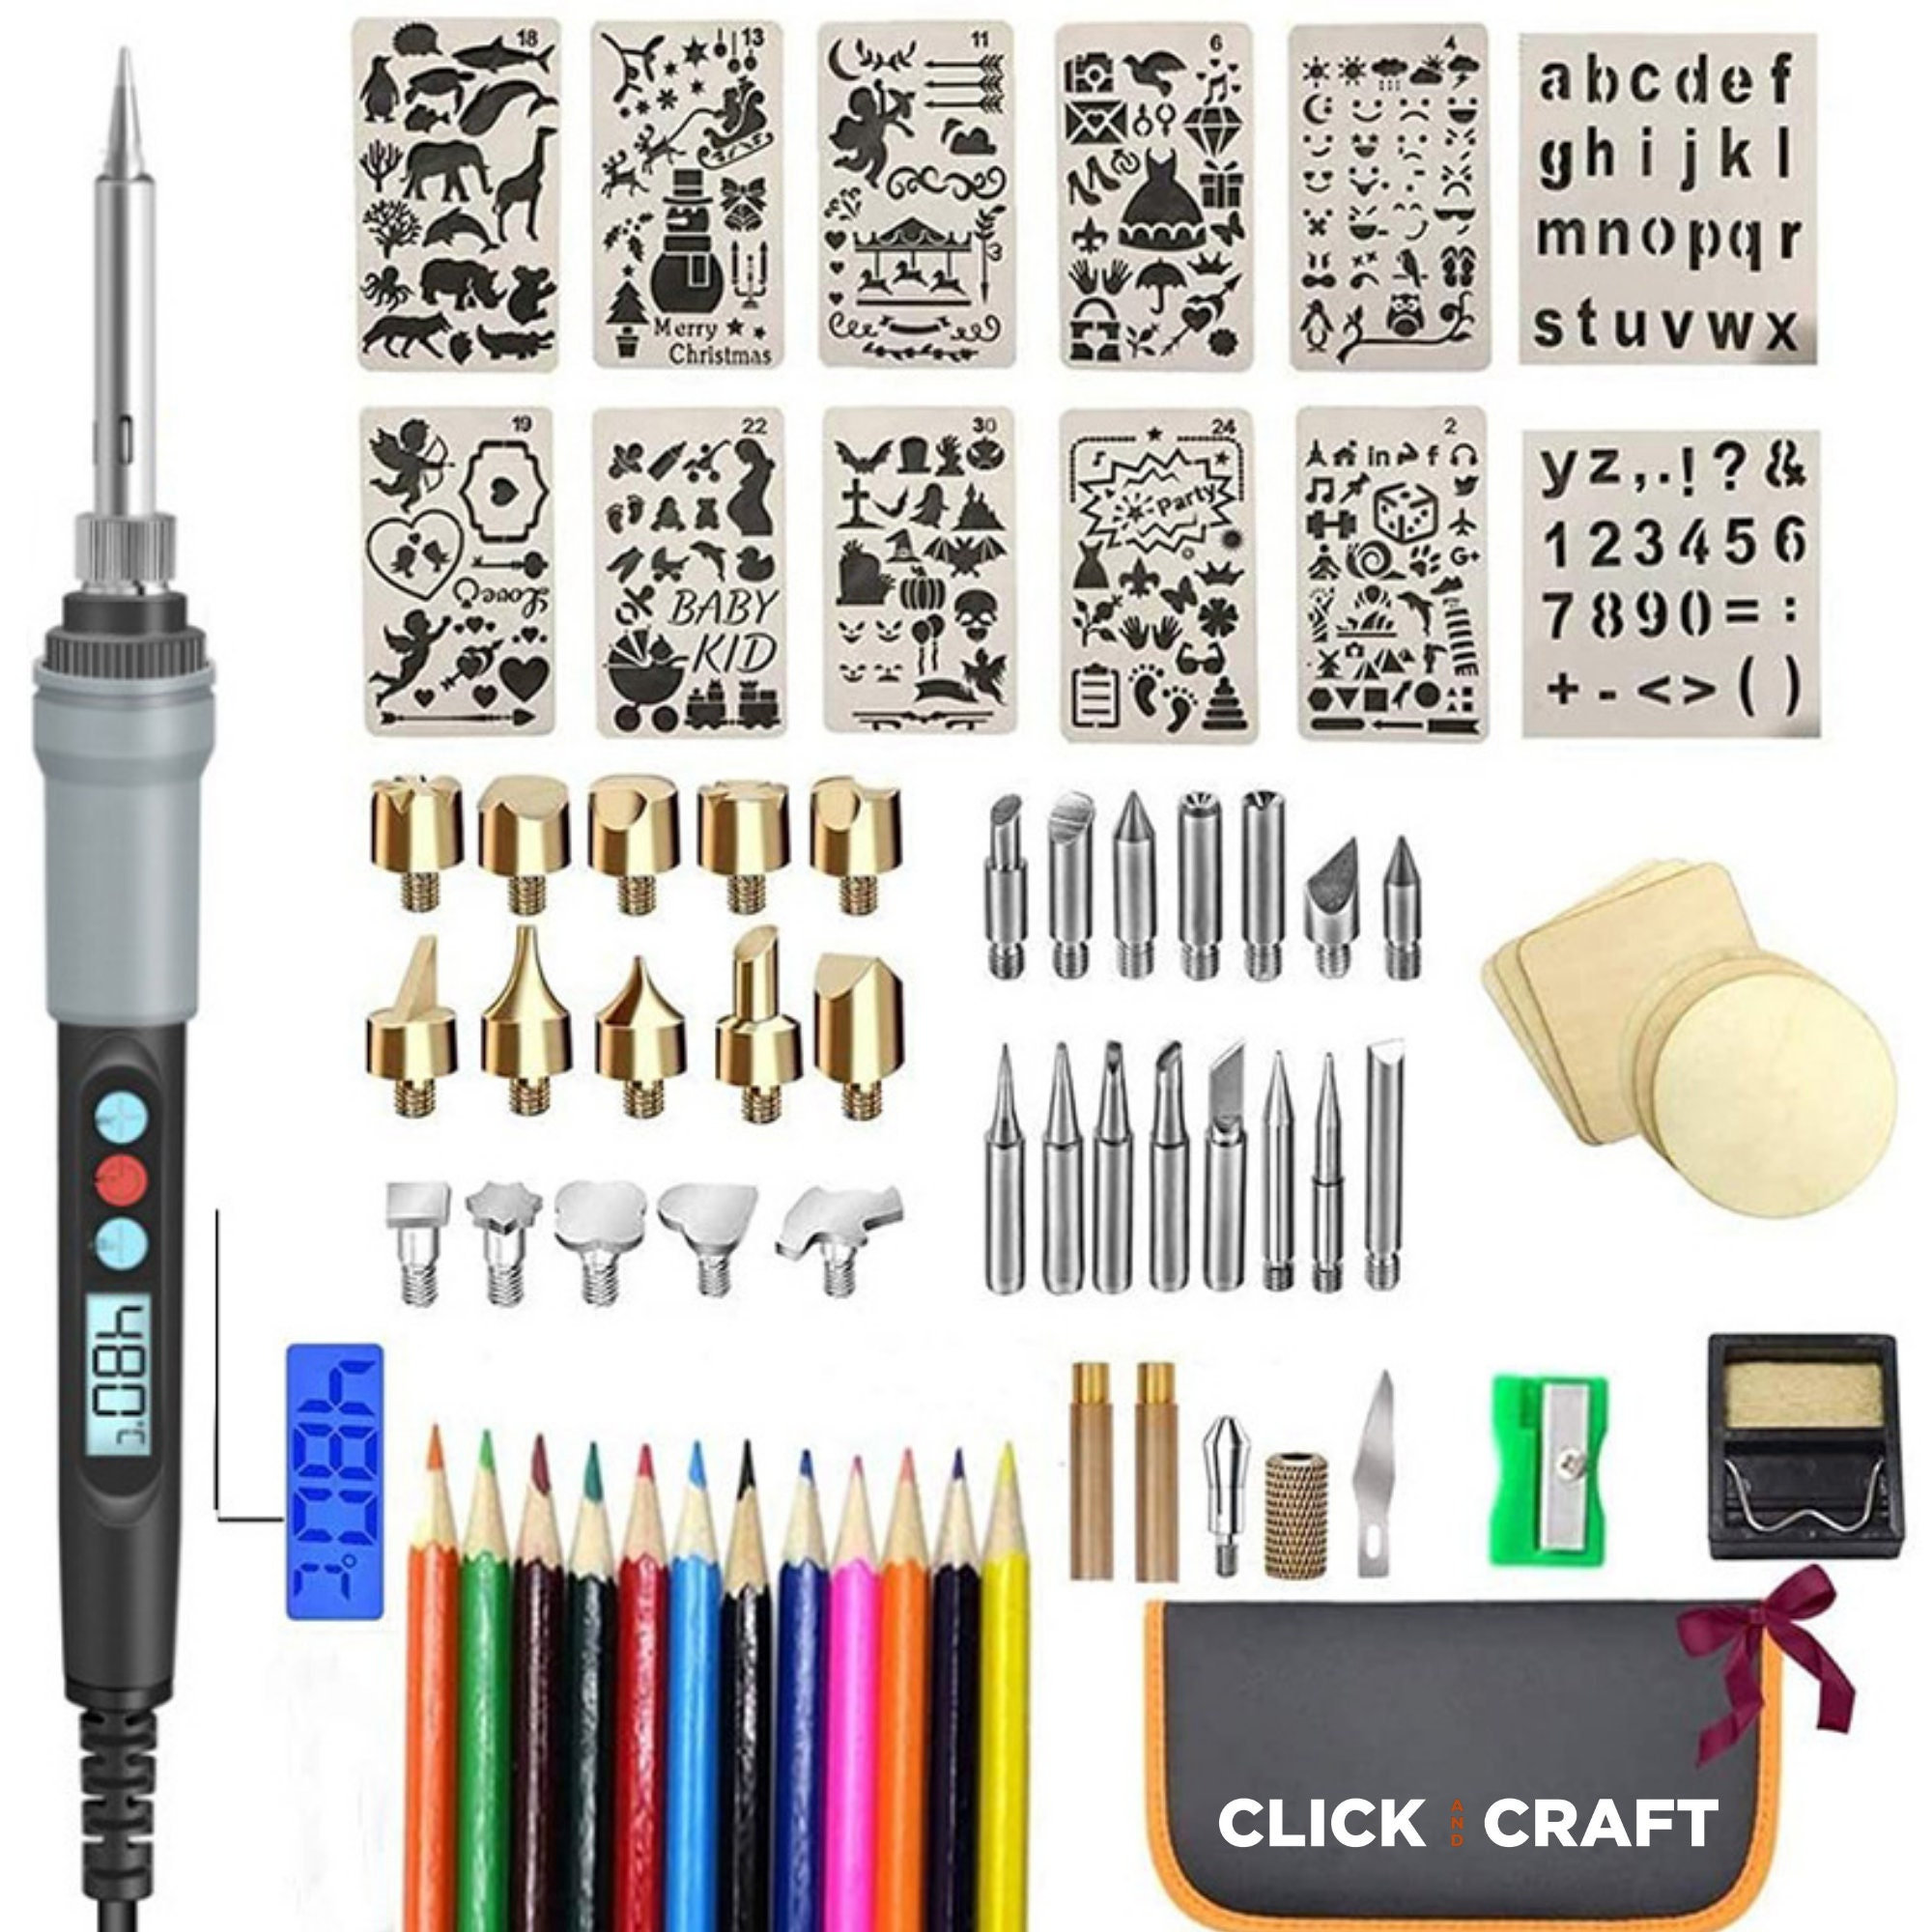 82 PCS Wood Burning Accessories for Pyrography Pen Wood Embossing Carving  DIY Crafts